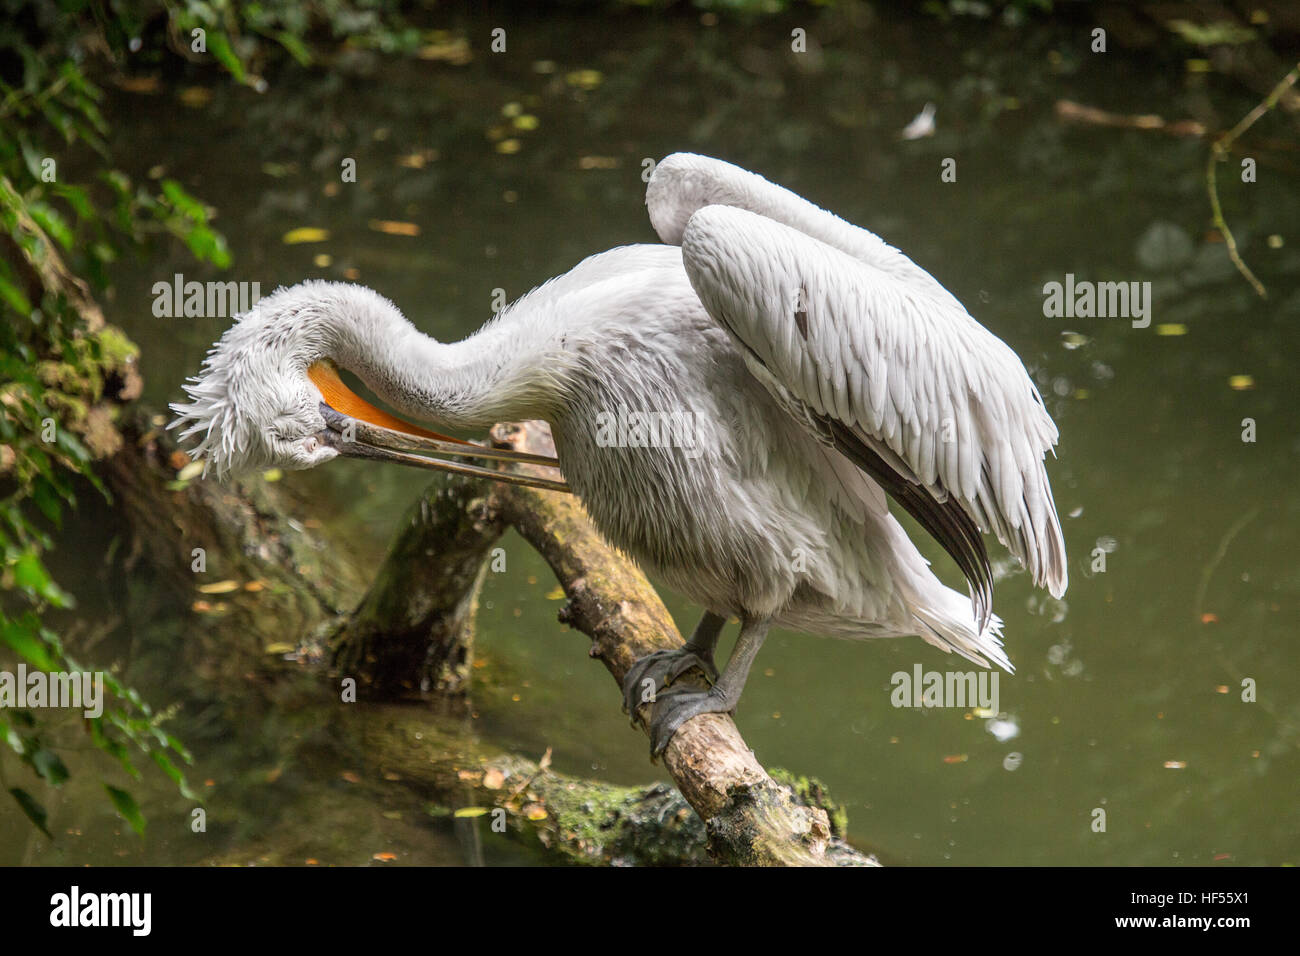 A Dalmatian pelican, Pelecanus crispus, perched on a a trunk that emerges from the water is cleaning its feathers. This bird breeds from Europe to Ind Stock Photo